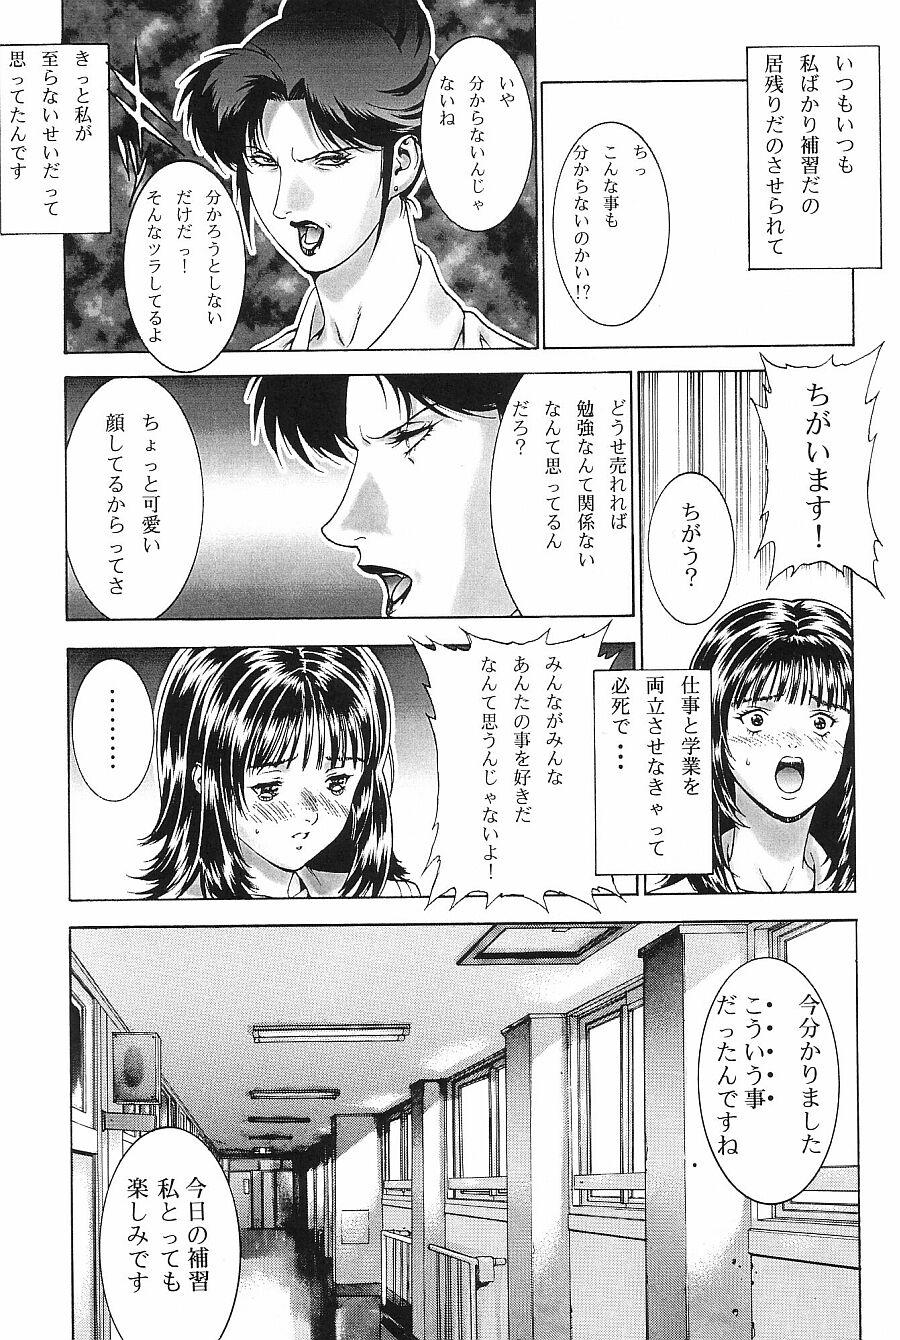 India Crazy-D Act 06 - Is Gundam 0083 Gloryholes - Page 11